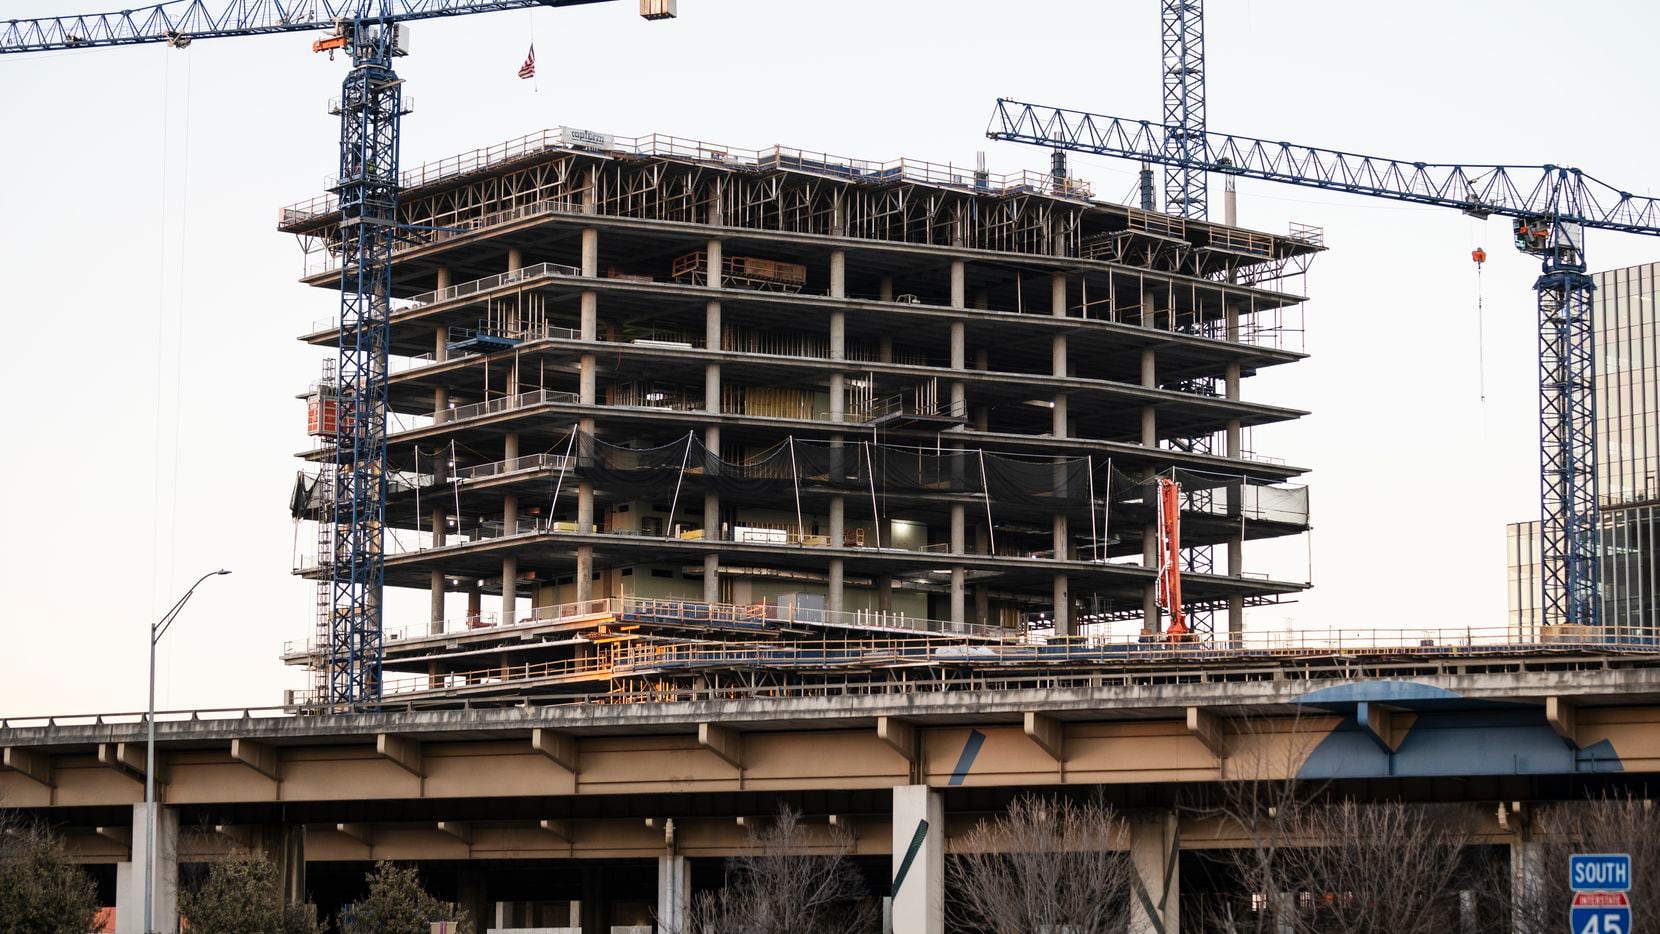 D-FW commercial construction starts were up 27% in September.